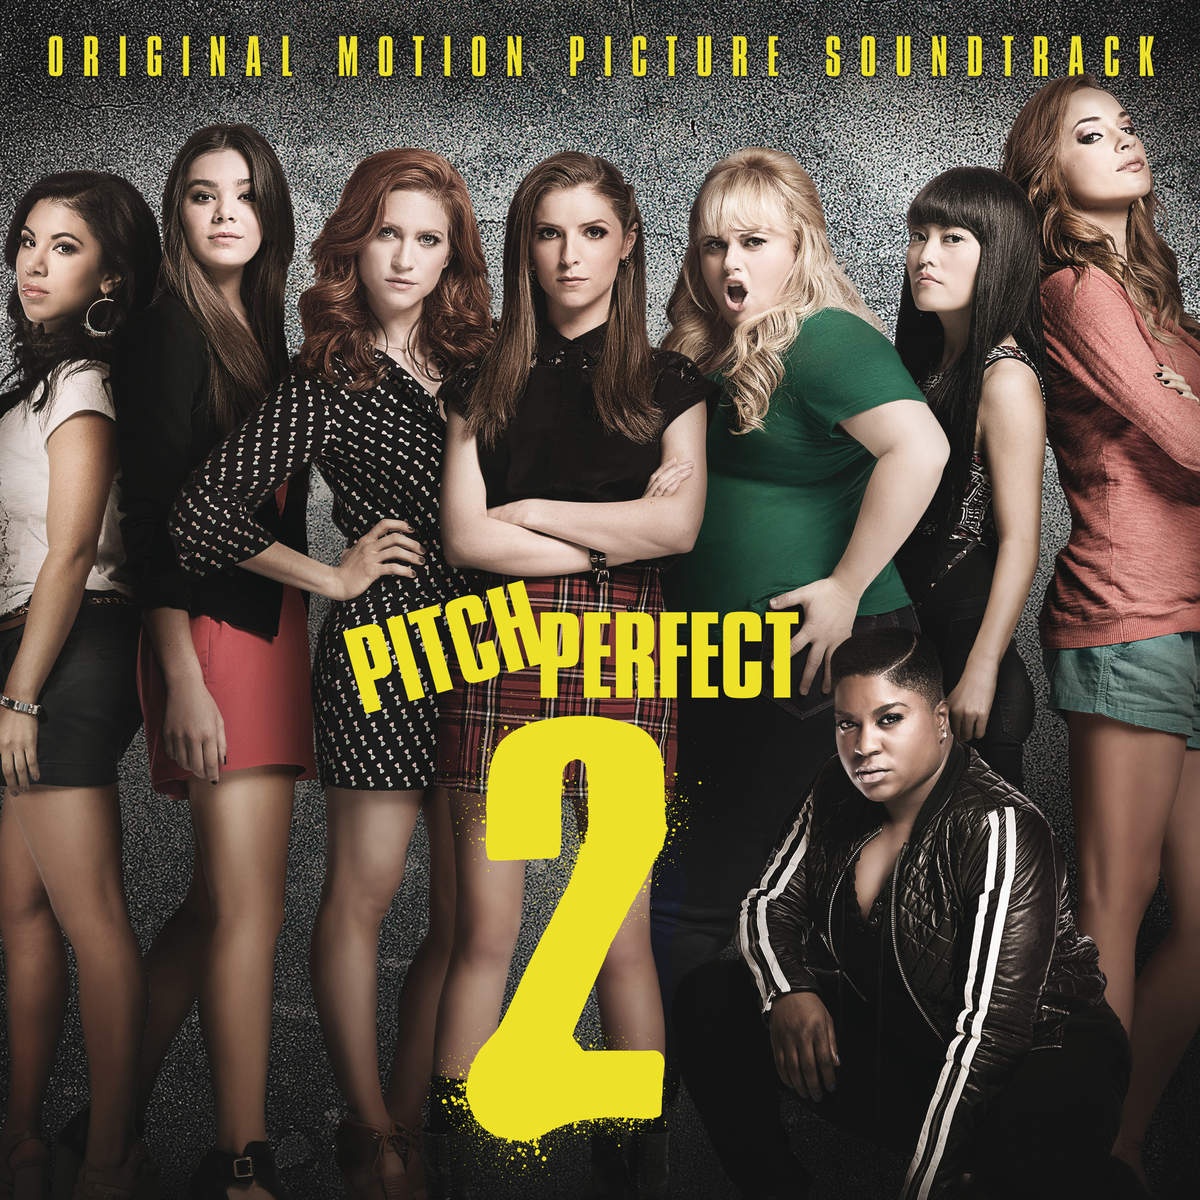 Crazy Youngsters - From "Pitch Perfect 2" Soundtrack